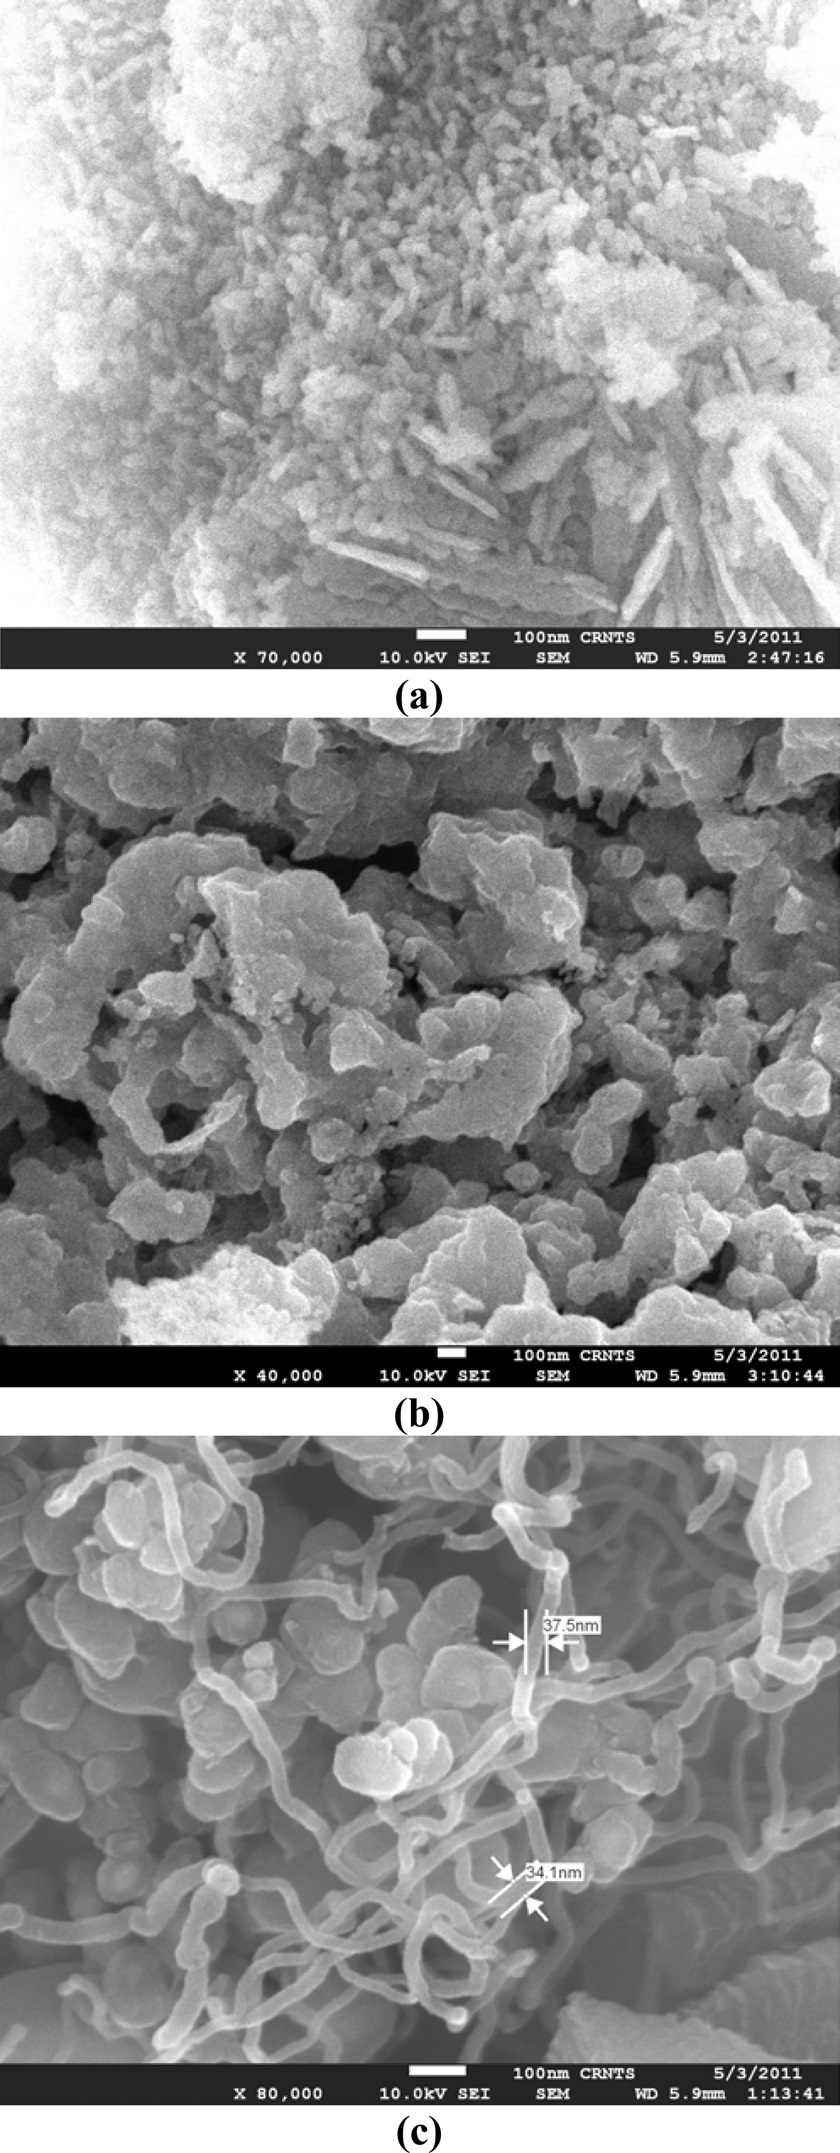 High-resolution scanning electron microscopy images of carbon
from castor oil synthesized under different pyrolytic conditions i.e., (a) Ar
& Ni at 700℃ showing a mixture of needle, beads and several undefined
shapes, (b) N & Zn at 500℃ showing irregular shapes, and (c) H & Co at
900℃ showing coiled nanotubes.